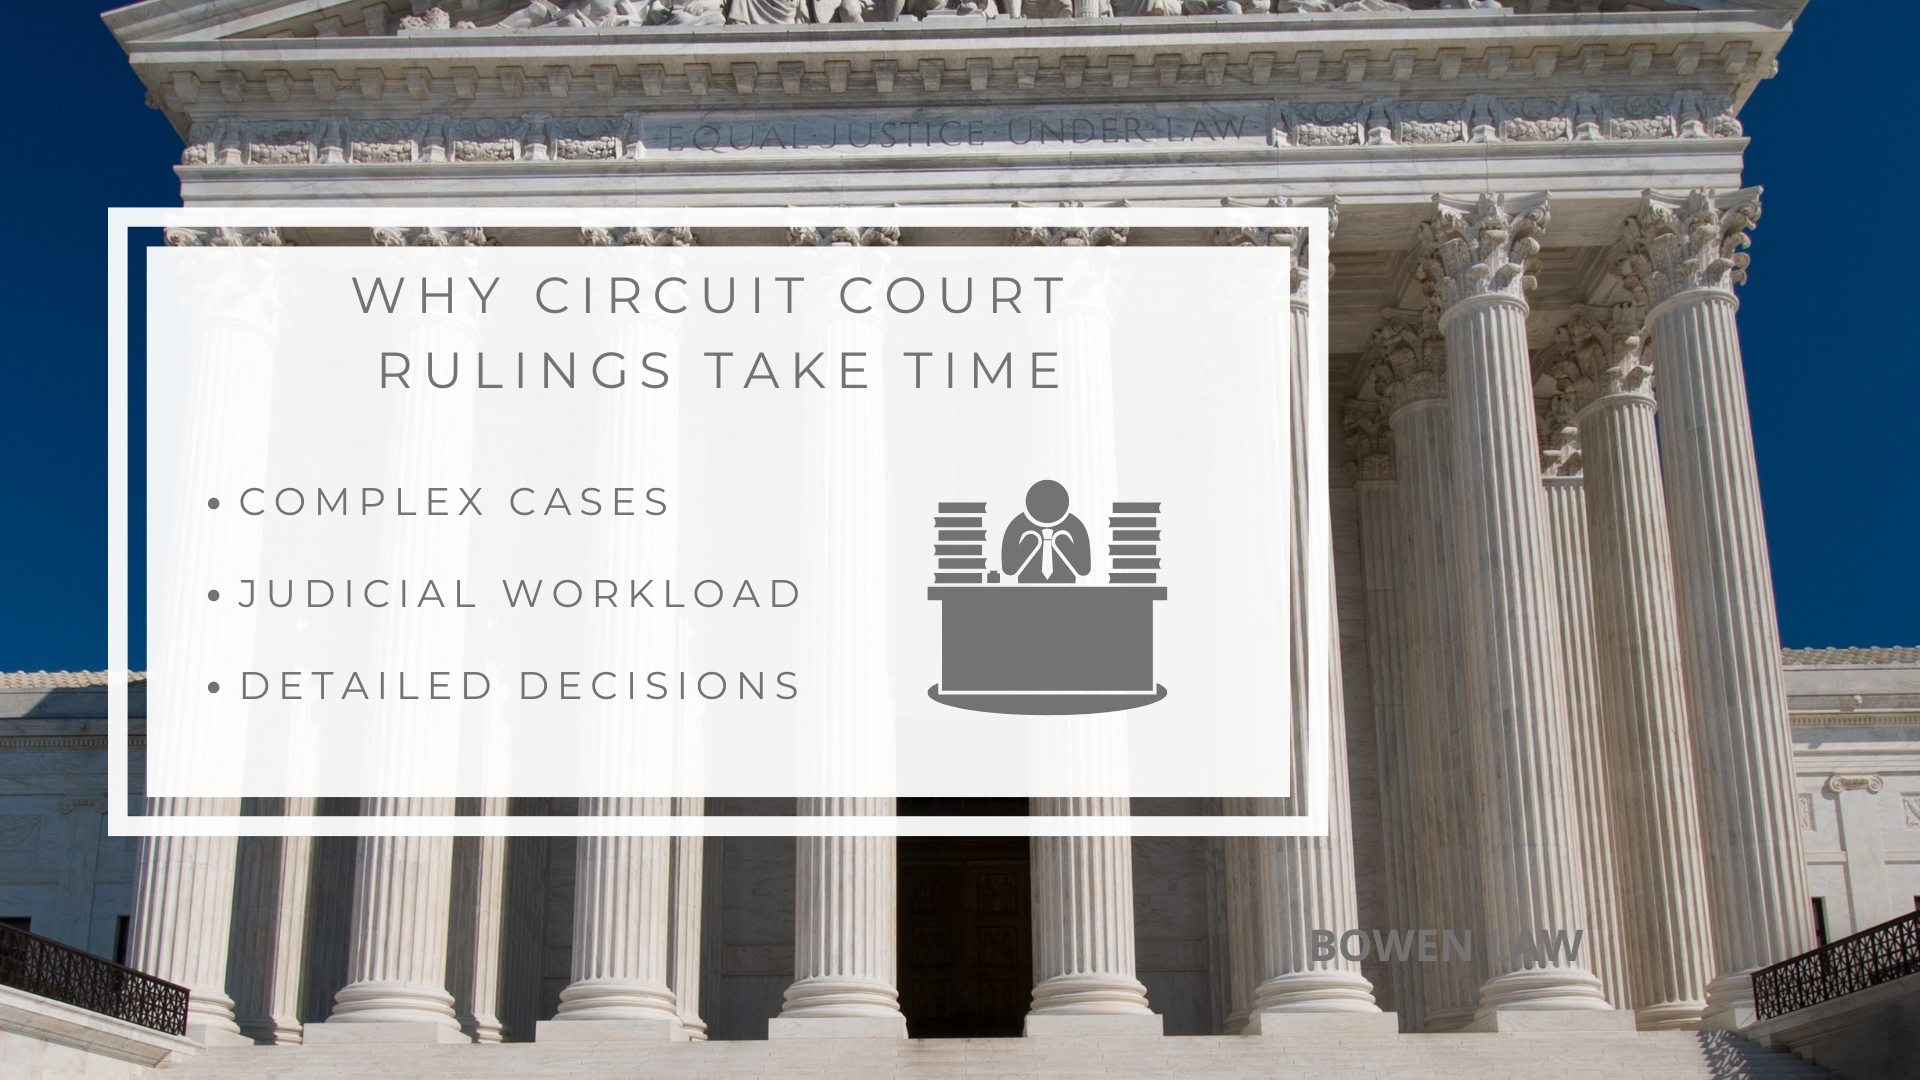 Infographic image of why circuit court rulings take time